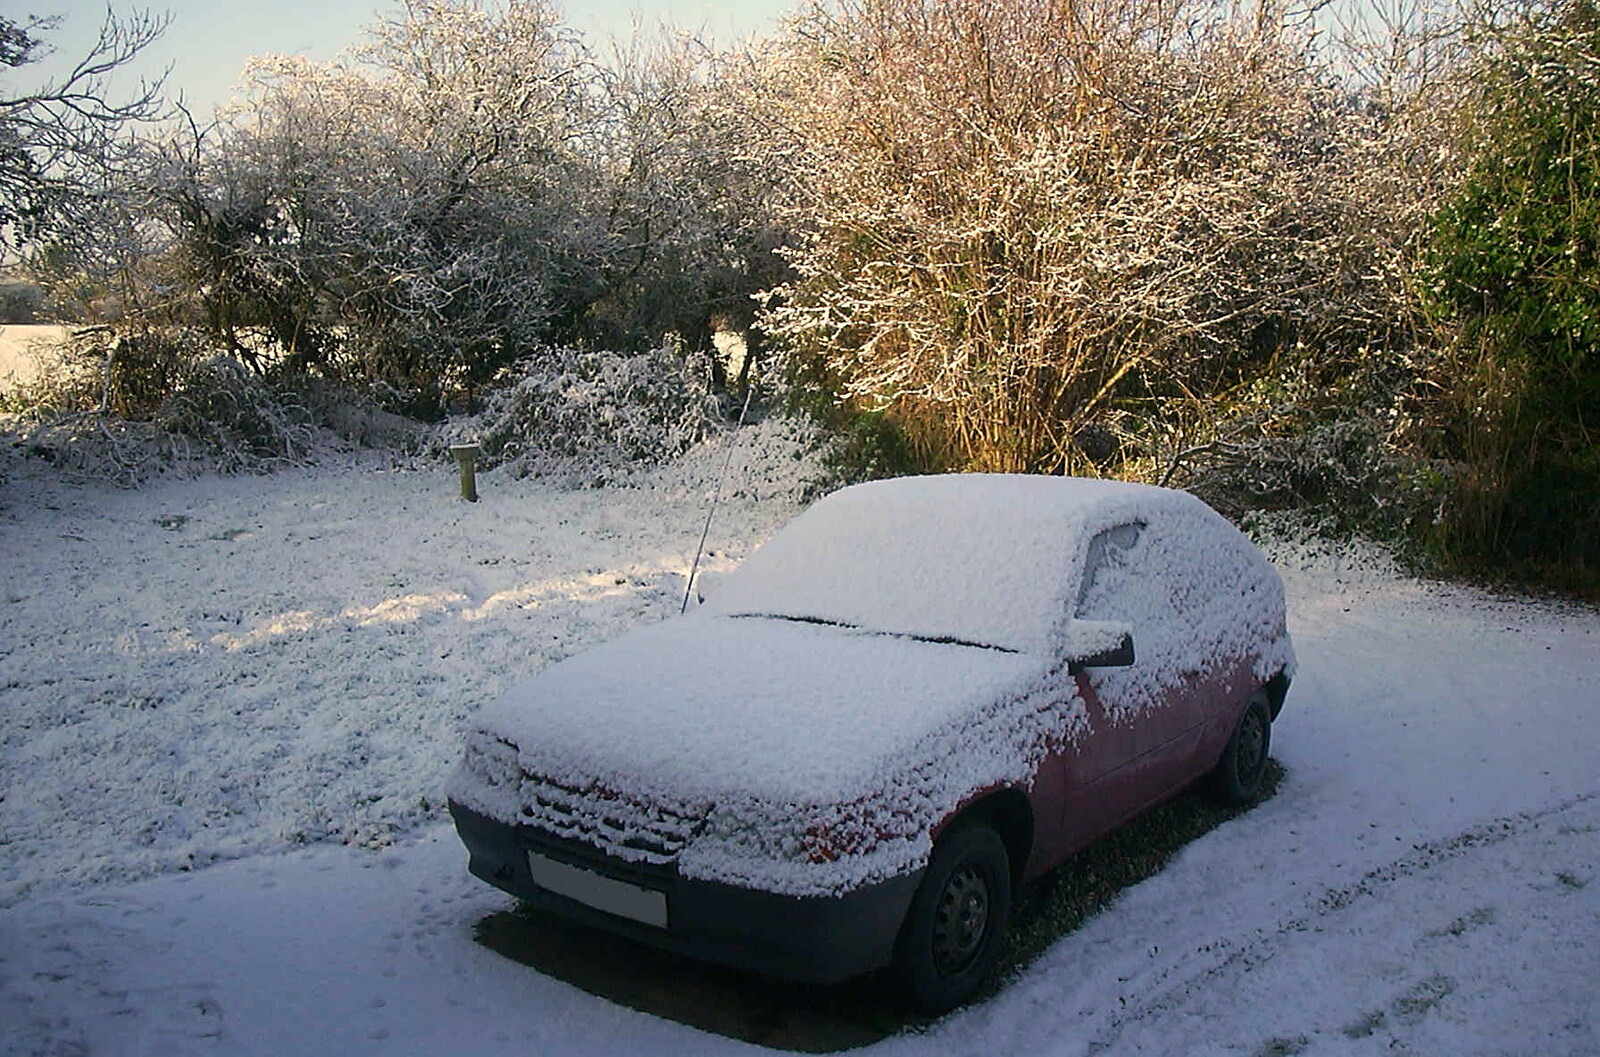 The car has a covering of snow from The House in Snow and a Carburettor, Brome, Suffolk - 20th December 2002